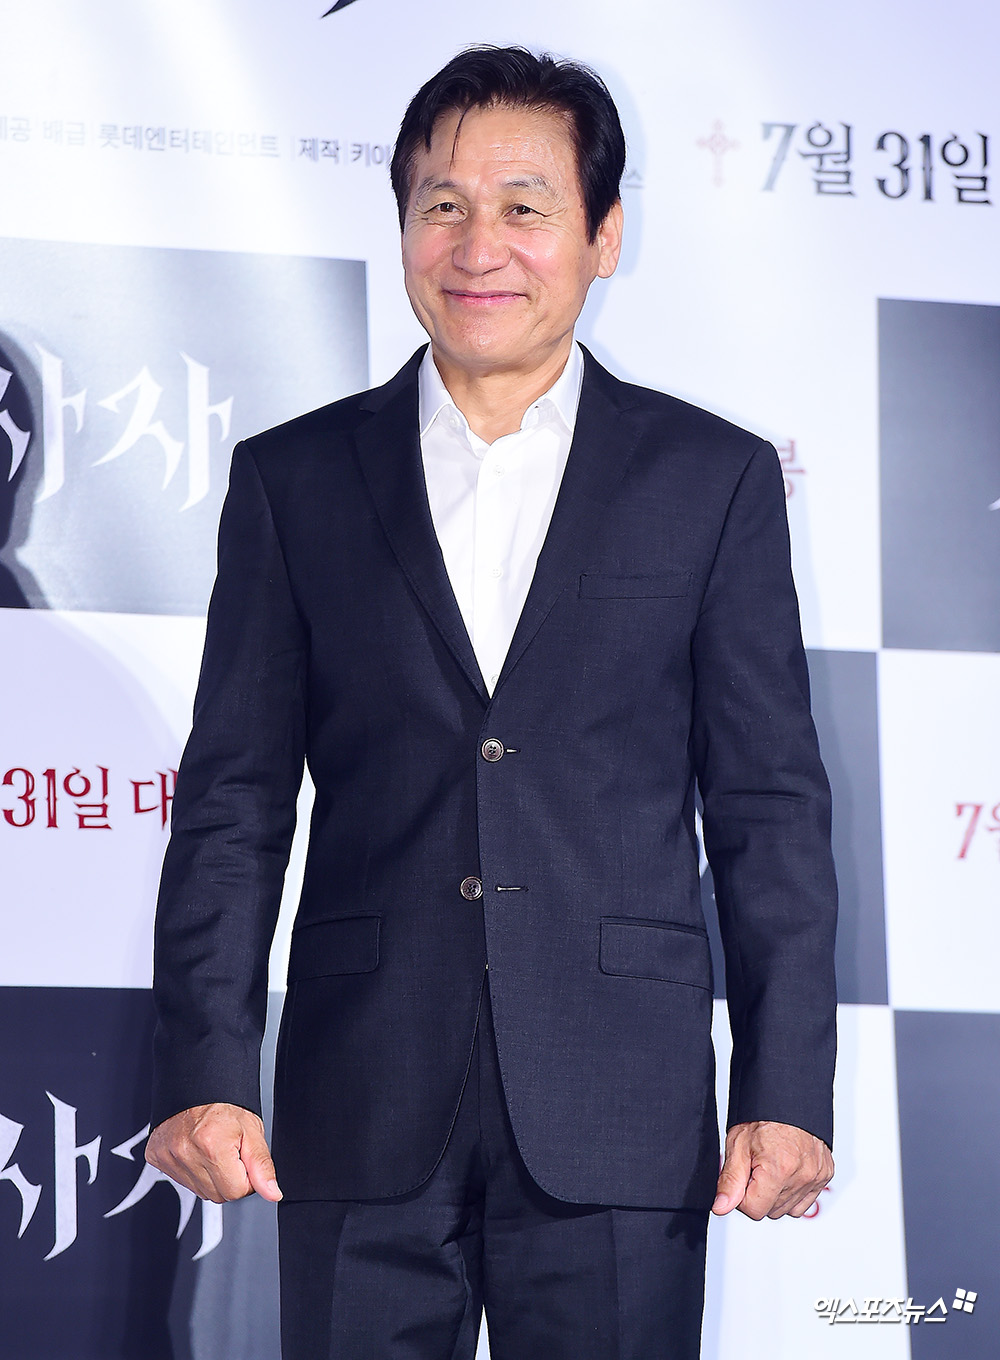 Actor Ahn Sung-ki said he learned Latin for the role of priest.The movie Lion (director Kim Joo-hwan) premiered at the entrance of Lotte Cinema Counter in Gwangjin-gu, Seoul on the 22nd.Actors Park Seo-joon, Ahn Sung-ki, Woo Do-hwan and Kim Joo-hwan attended the meeting to talk about the movie.I do not think I have done anything special, I learned Latin, and as a Catholic, I was so familiar with my body that I did not approach it comfortably, said Ahn Sung-ki.The character is a movie with tension, but if it is fun, it seems to have a Point of rest.I think its fortunate that (the audience) likes the resting part when I look at it together today. The Lion is a story about the martial arts champion Yonghu (Park Seo-joon) meeting with the Kuma priest Anshinbu (Ahn Sung-ki) and confronting the powerful evil (), which has confused the world.Photo = DB